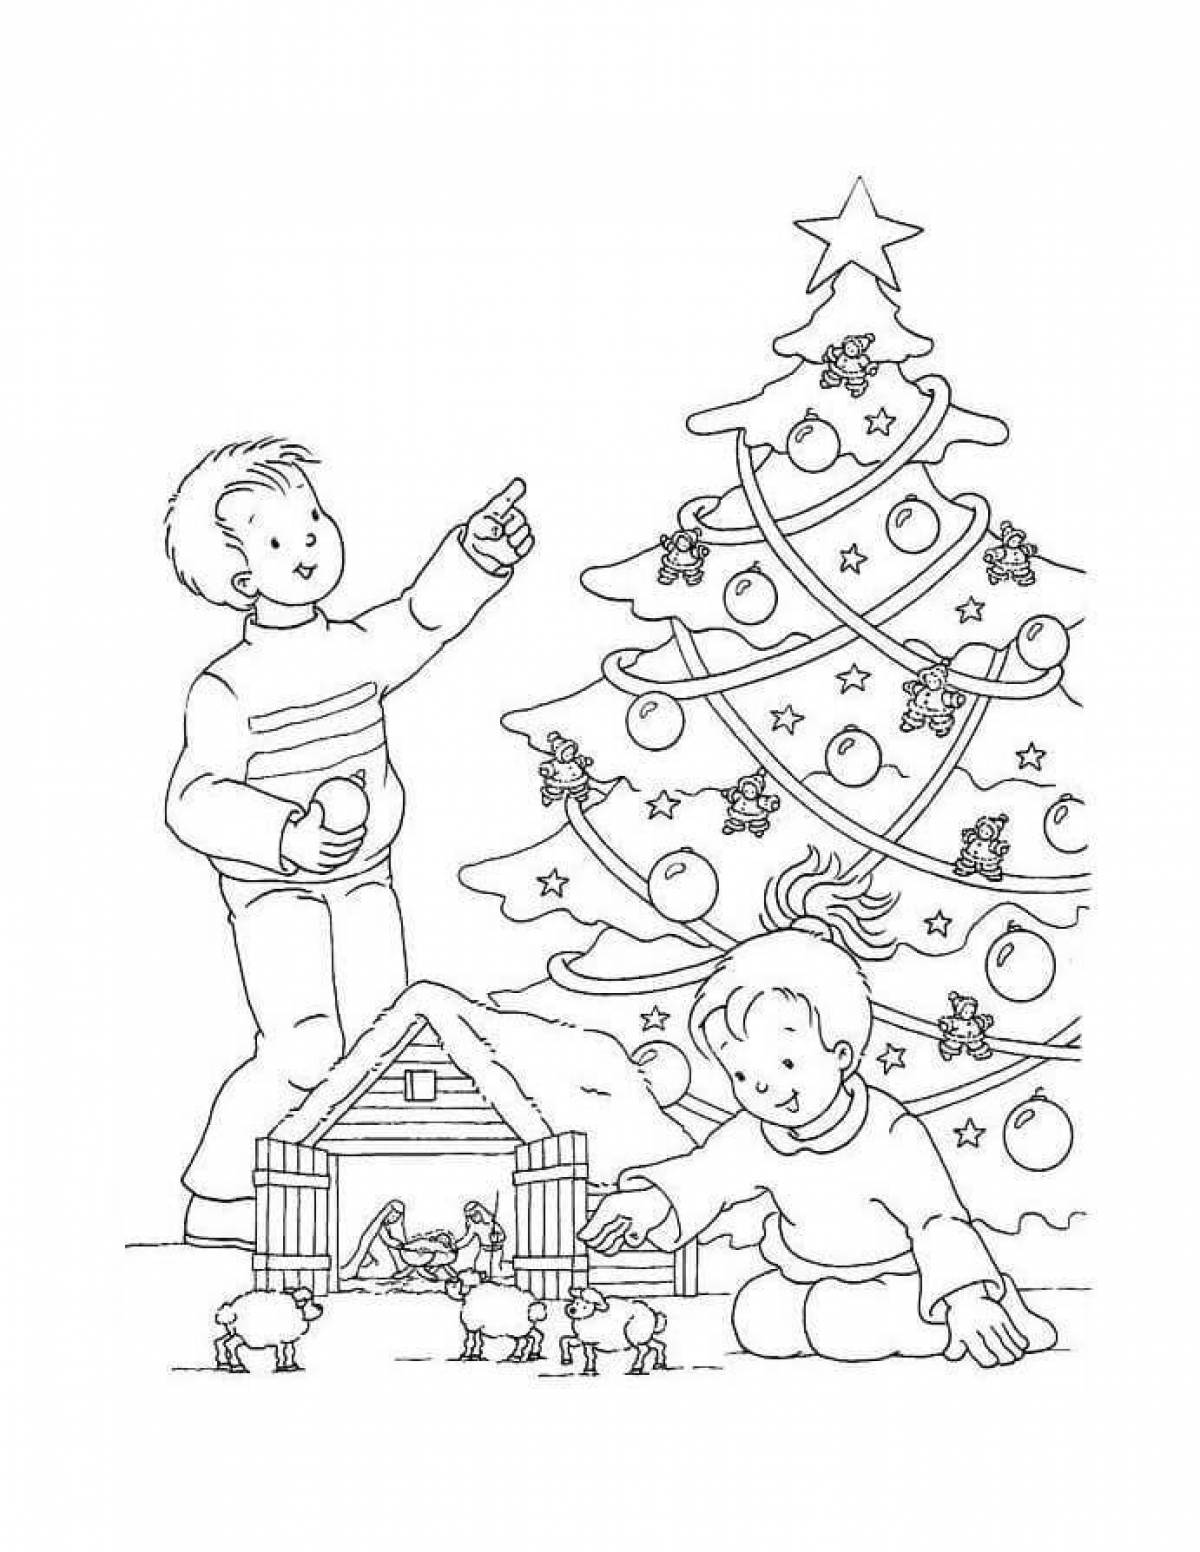 Exuberant Christmas coloring book for 6-7 year olds